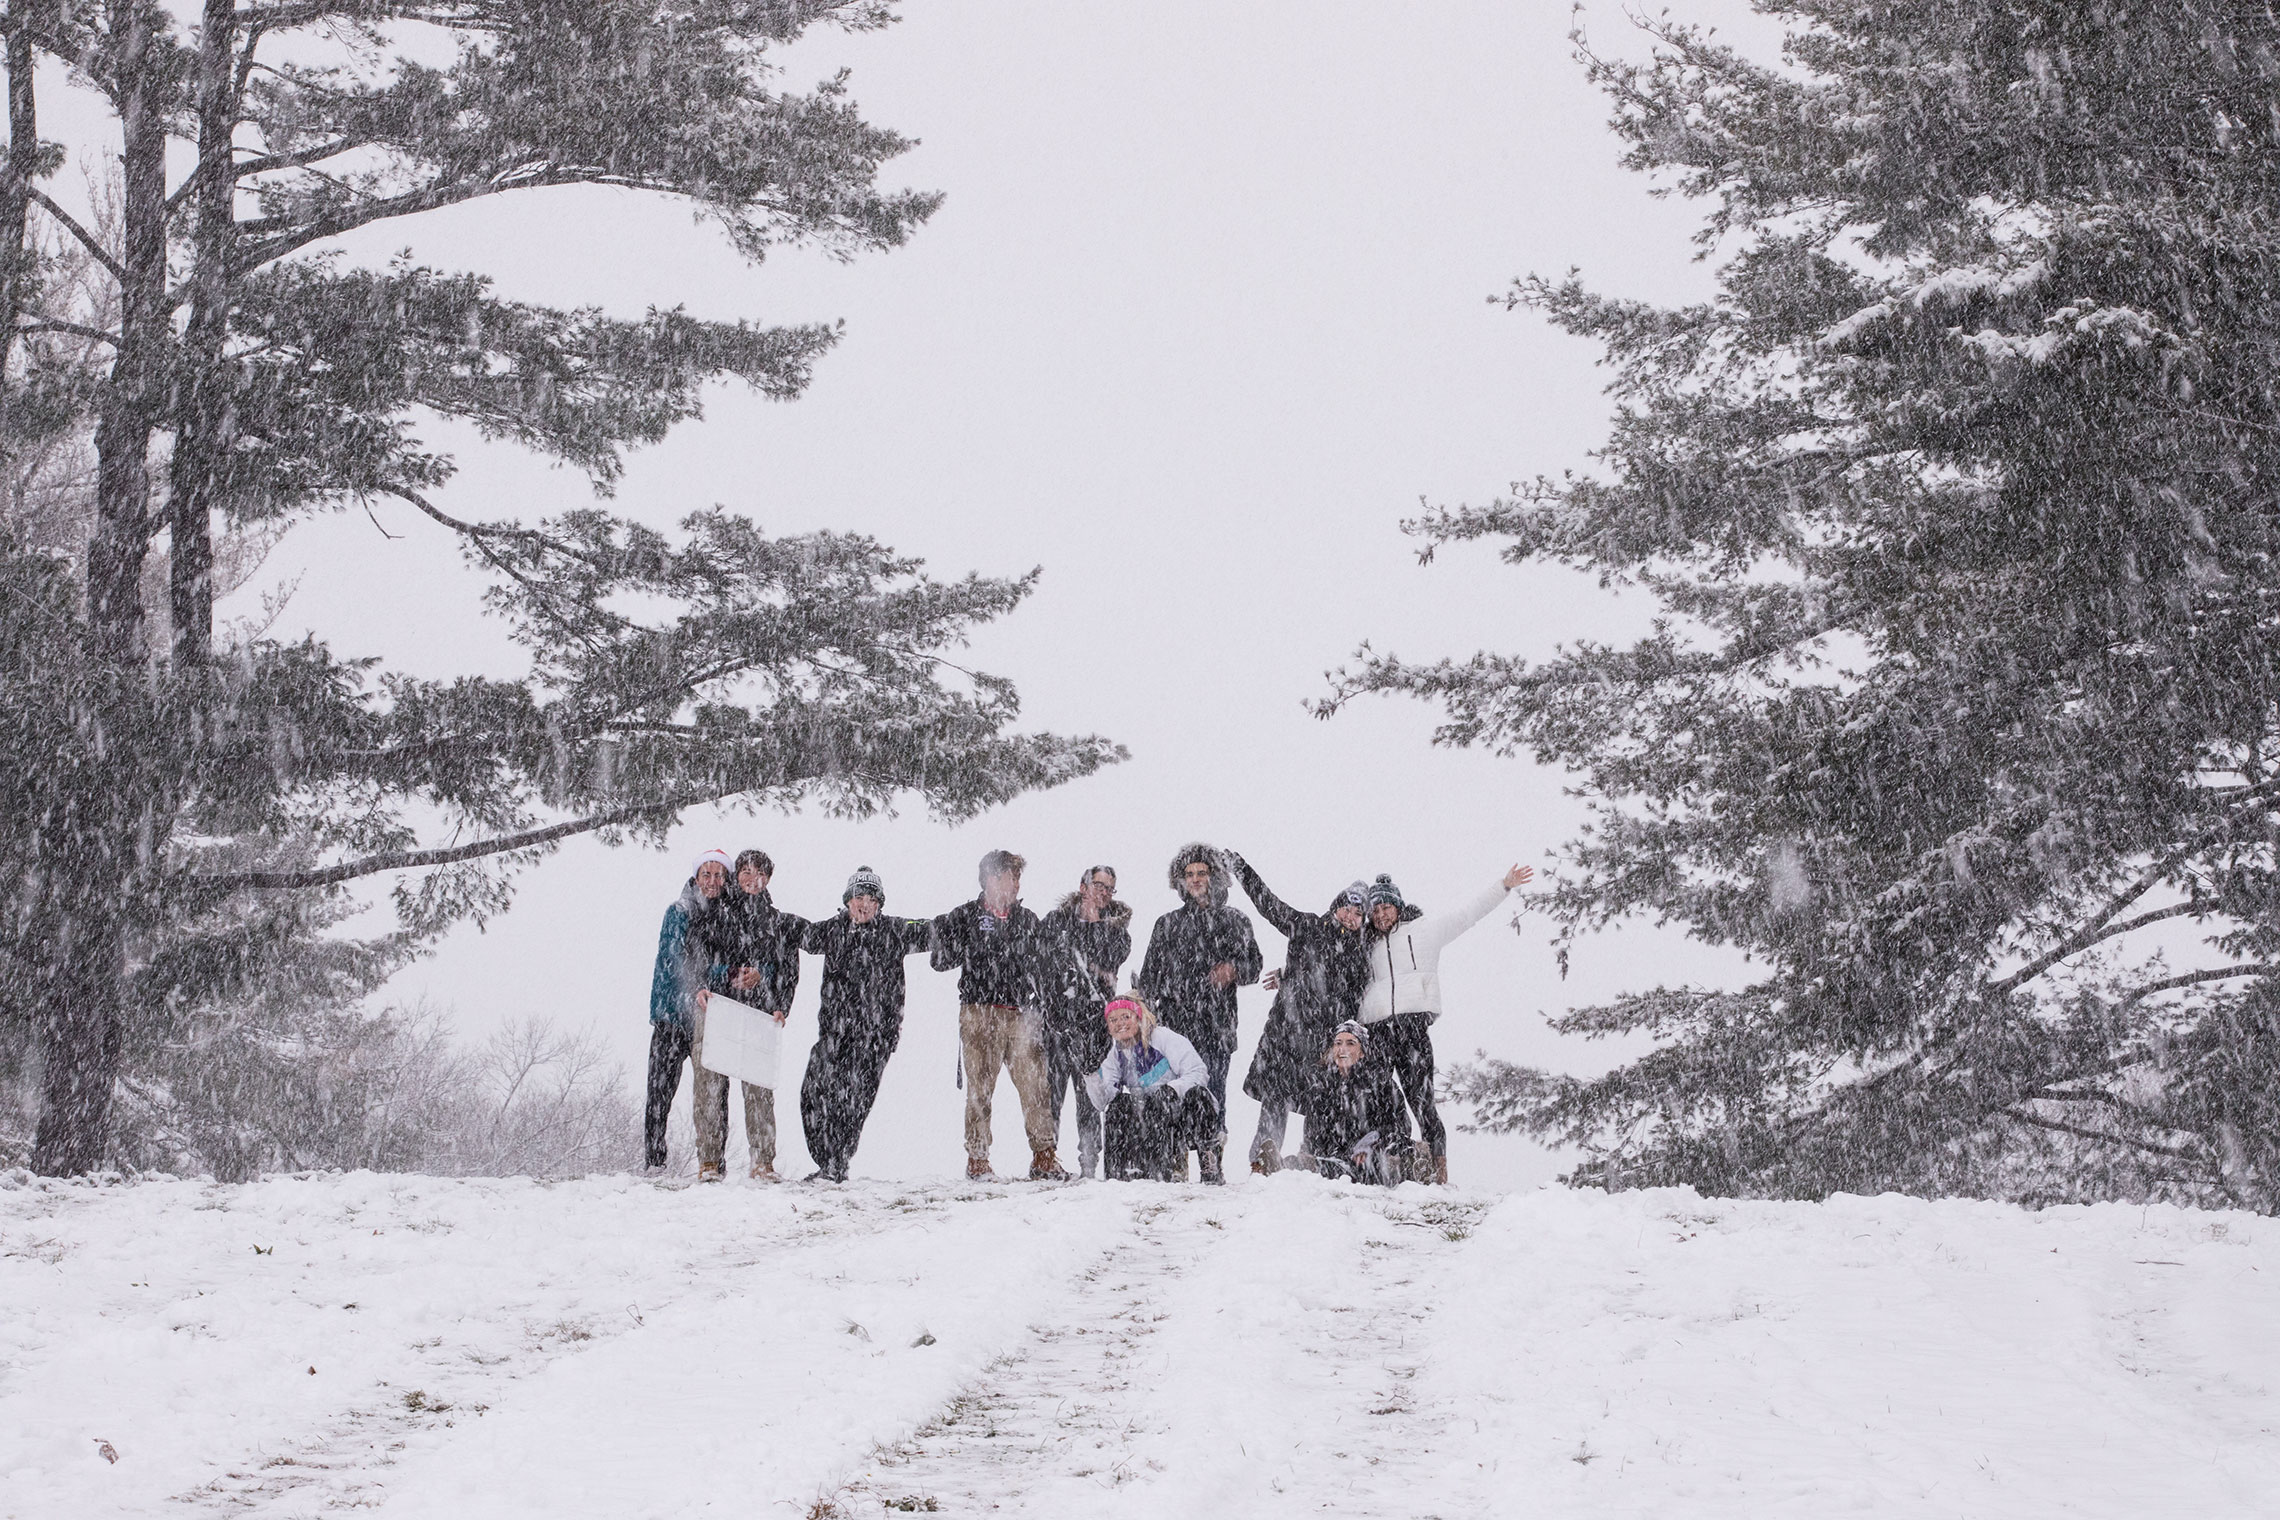 Students sledding on the Amherst College campus.